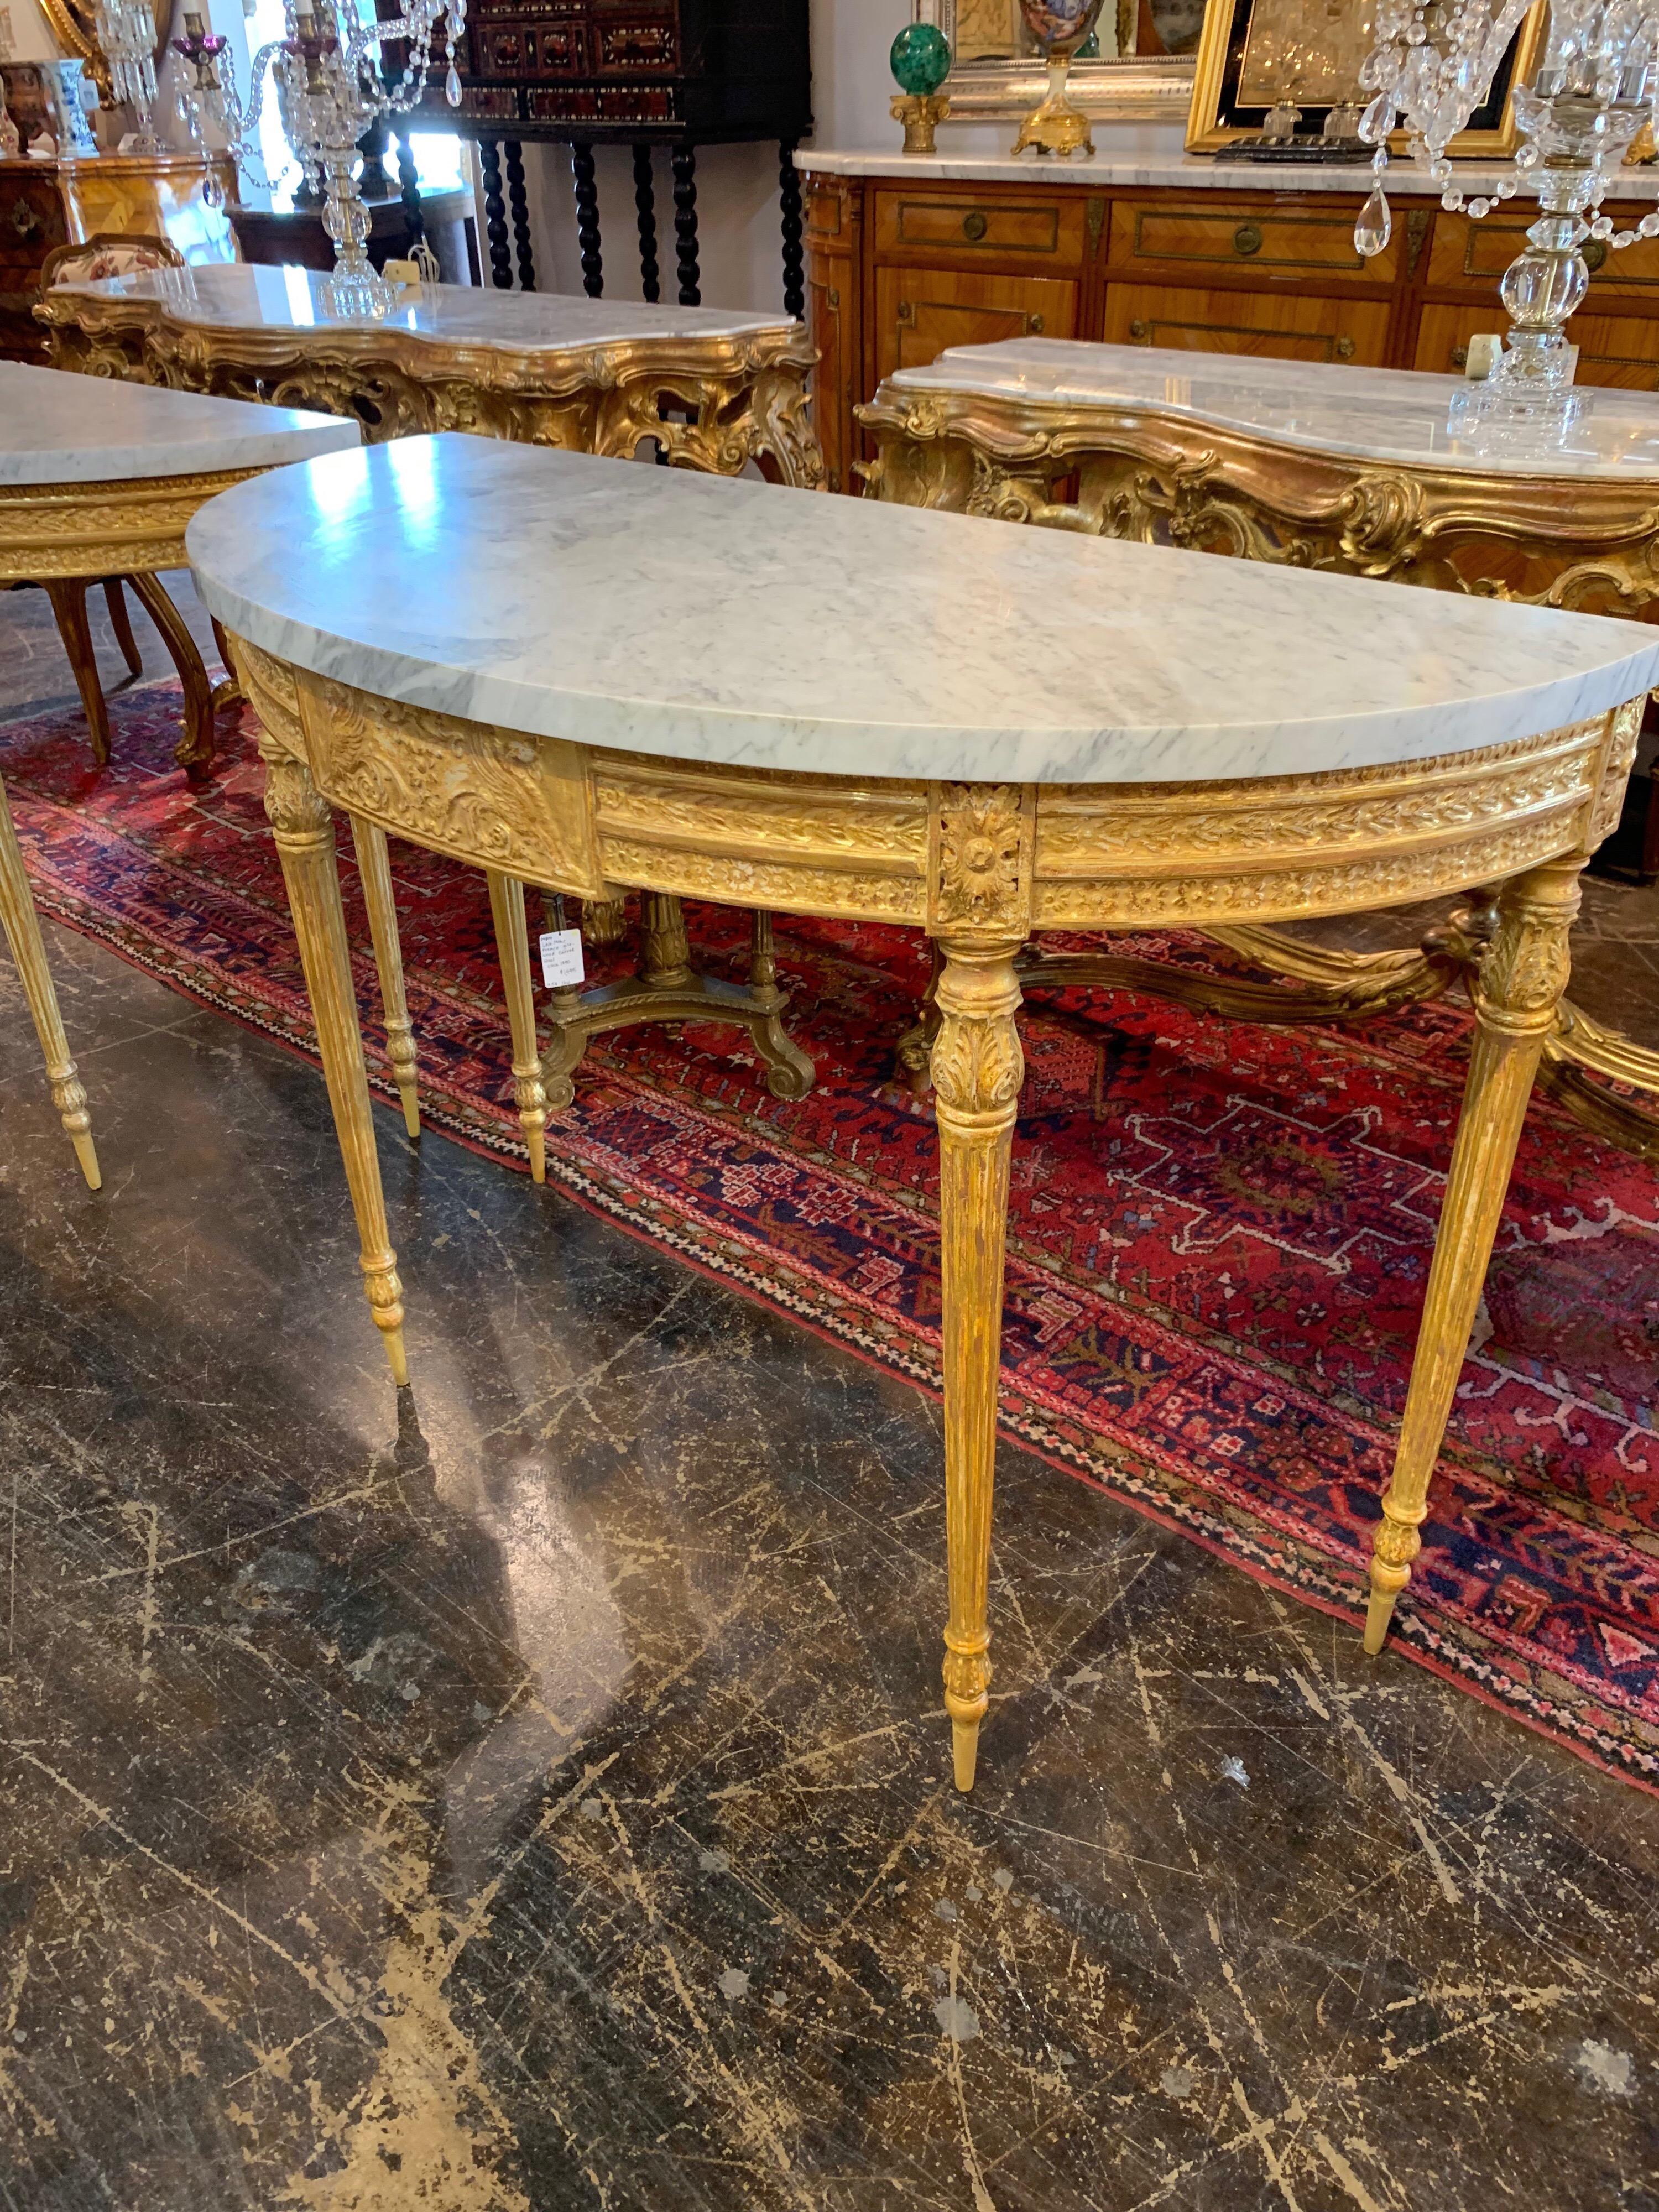 Exceptional pair of French Louis XVI style tightly carved giltwood demilune console tables with Carrara marble tops. Amazing carving and gilding on this pair. The marble is also beautiful. Truly exquisite!